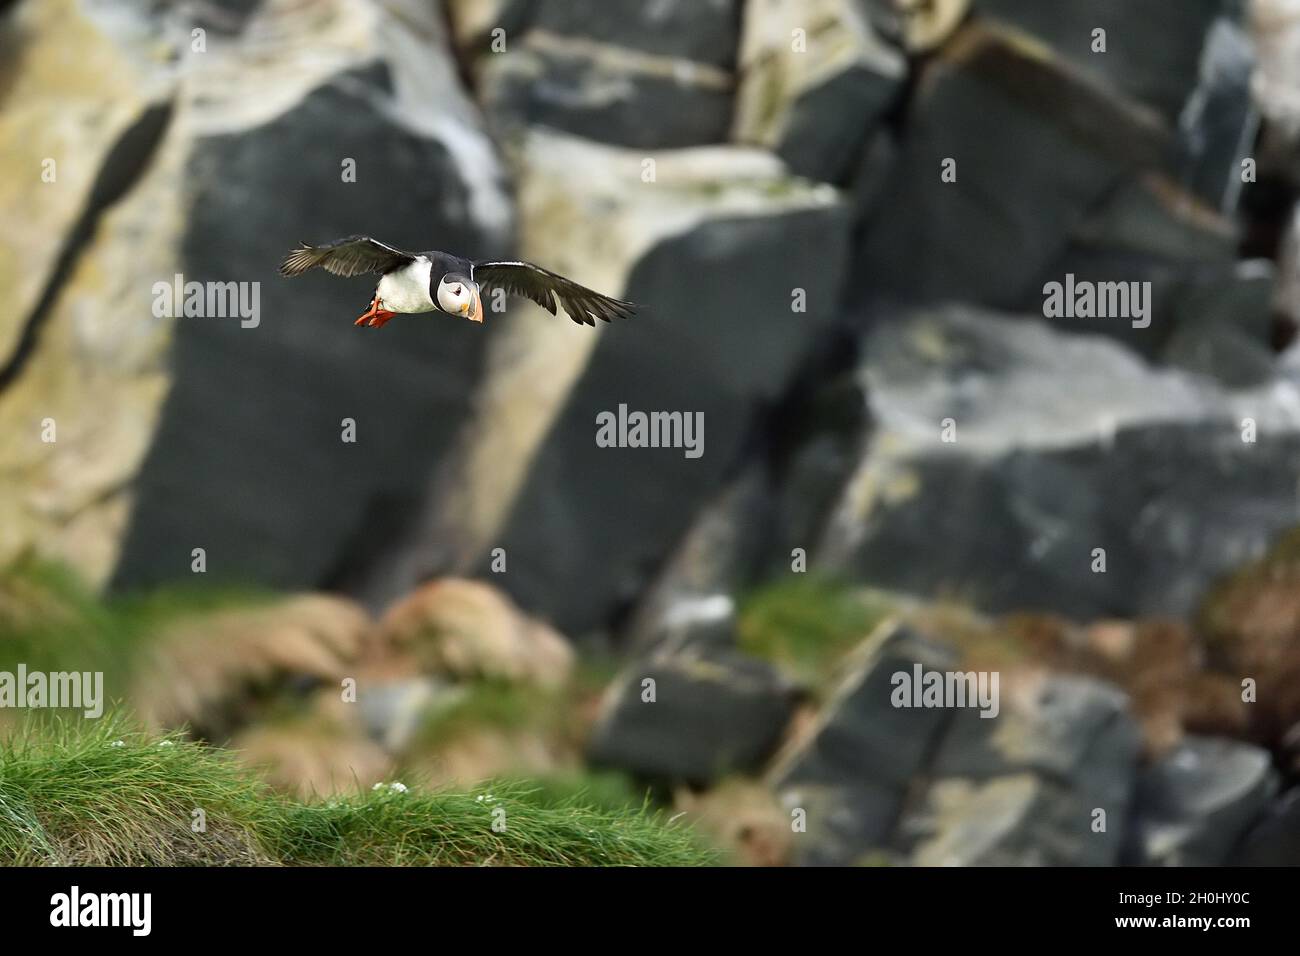 Puffin in flight with rocky background Stock Photo